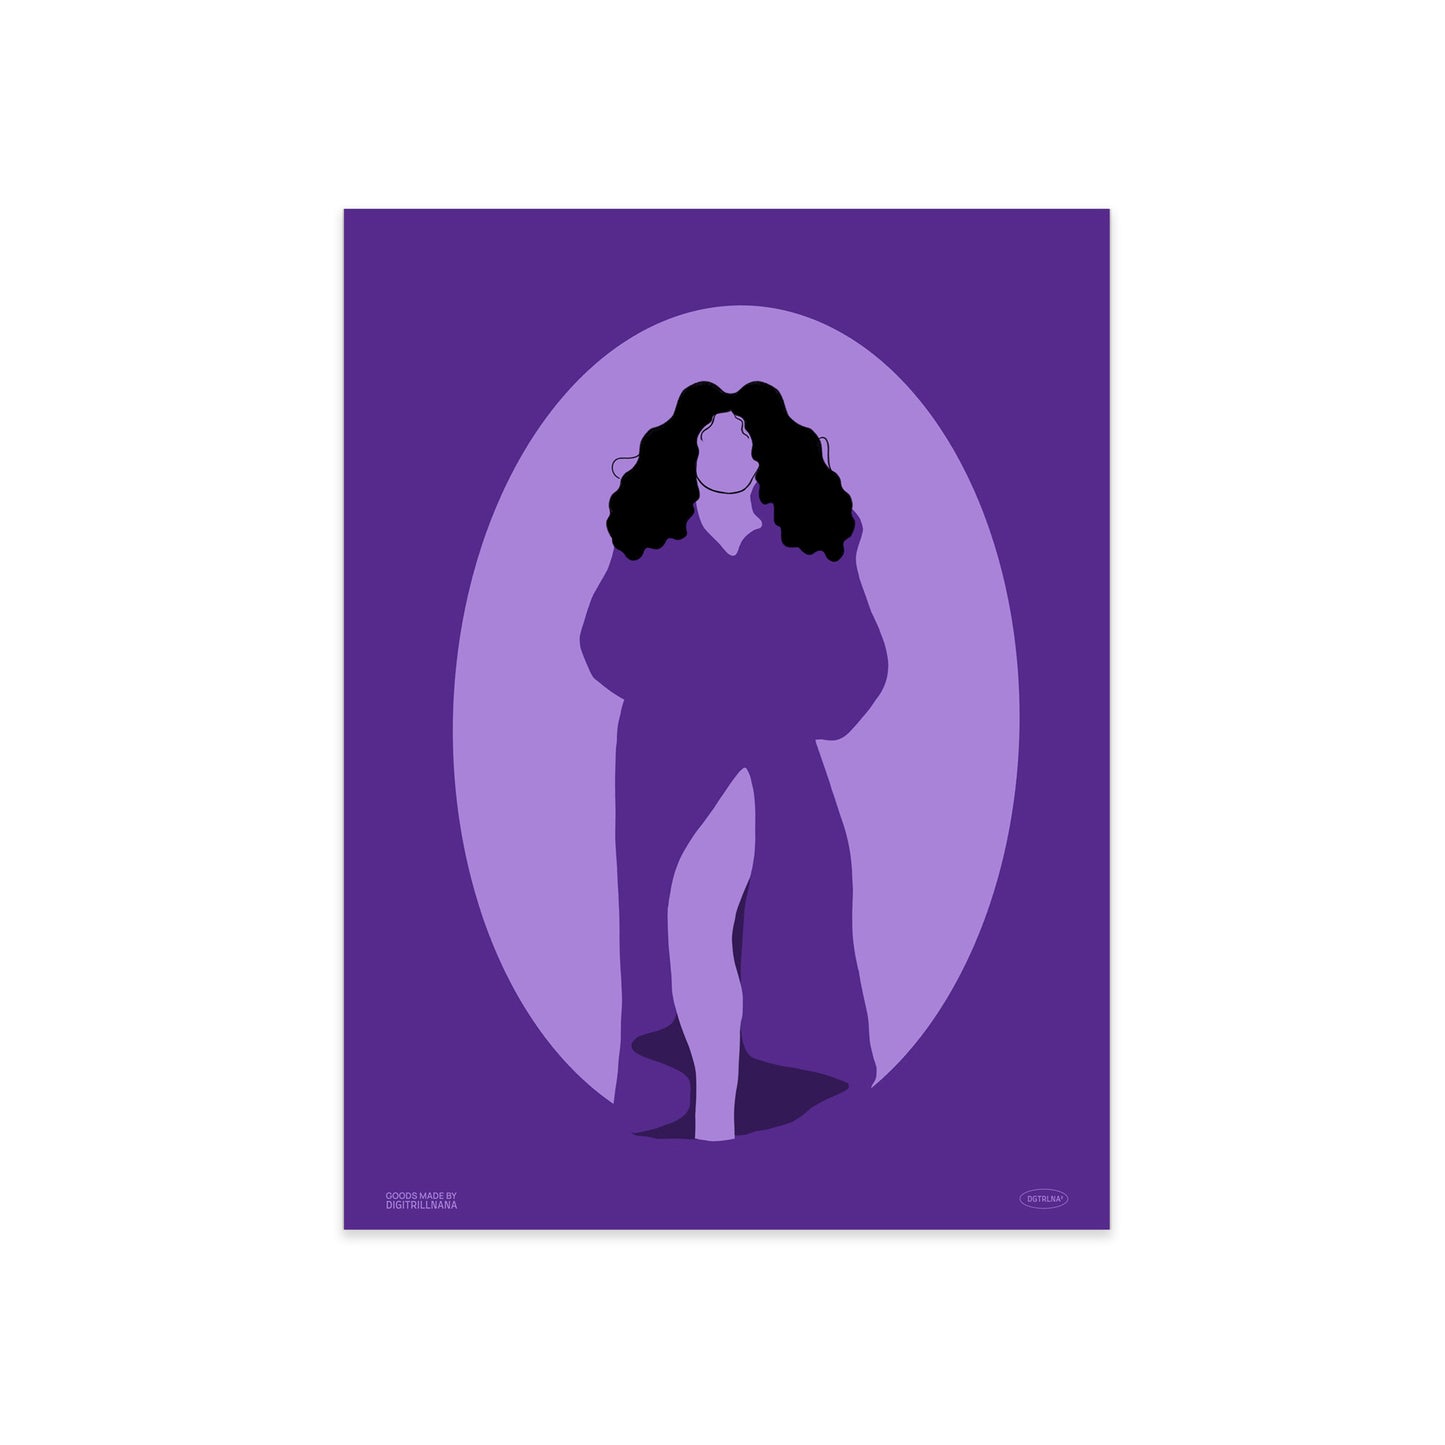 A series of four vibrant monochromatic illustrations of black women figures in the hues orange, blue, and teal. The illustration features a silhouette oval with a women’s figure inside. Light and dark colors create an optical illusion with positive and negative space. Silhouette 2: Illustration of a purple monochrome silhouette front view of a figure with full curly hair flower over a full coverage dress with a leg peaking through the slit. 